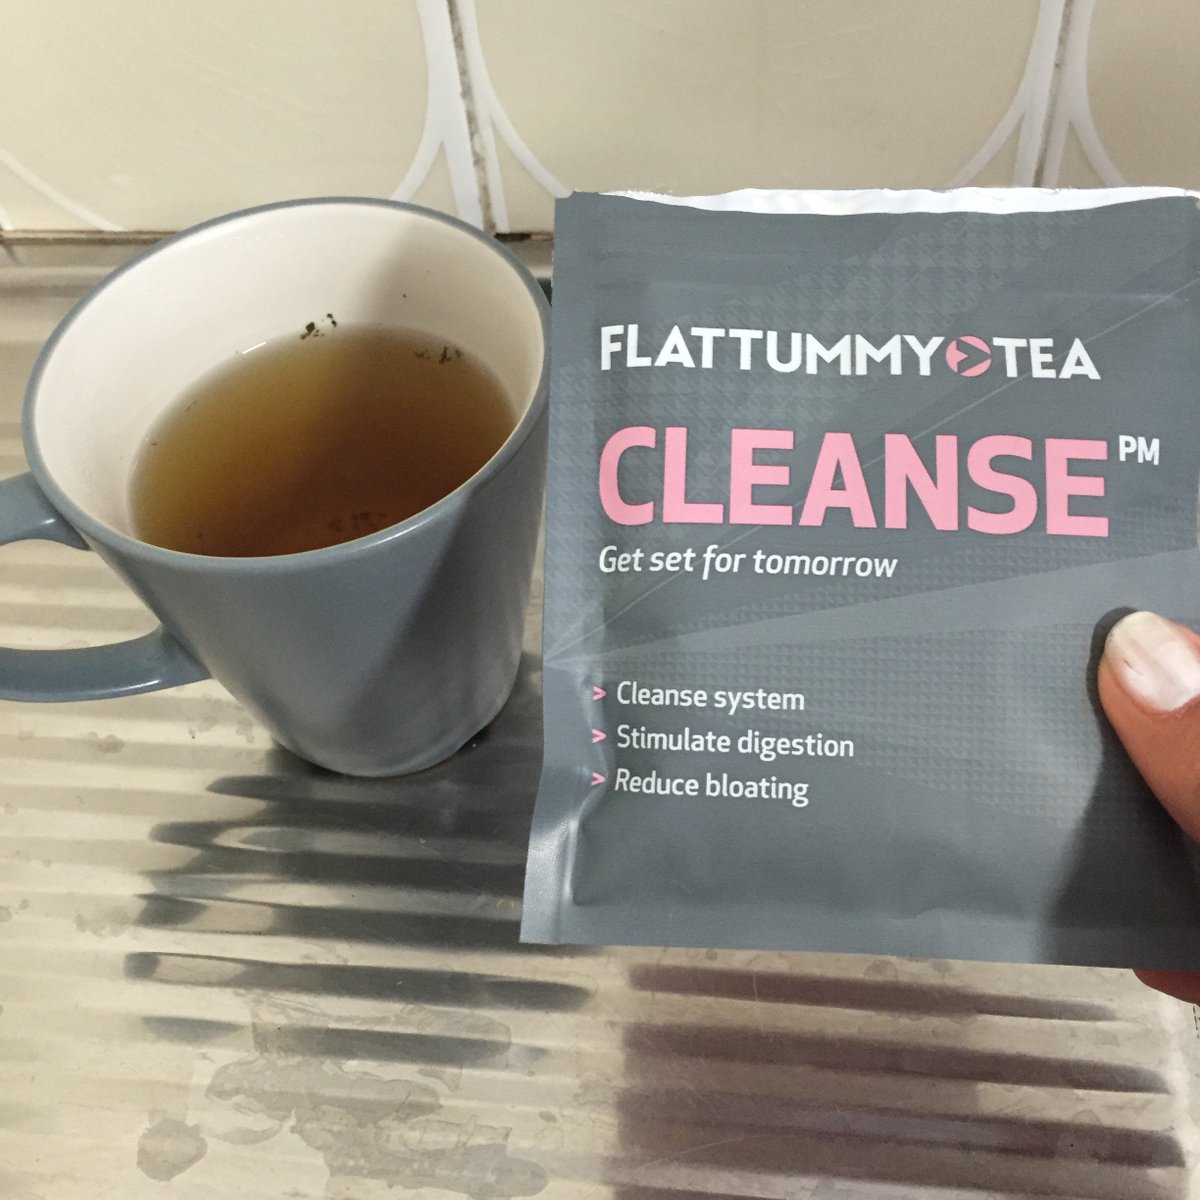 Gotta get snatched for these amazing things coming up! Back on my @flattummytea https://t.co/9wAyNNfPBt https://t.co/5CIRqZk897